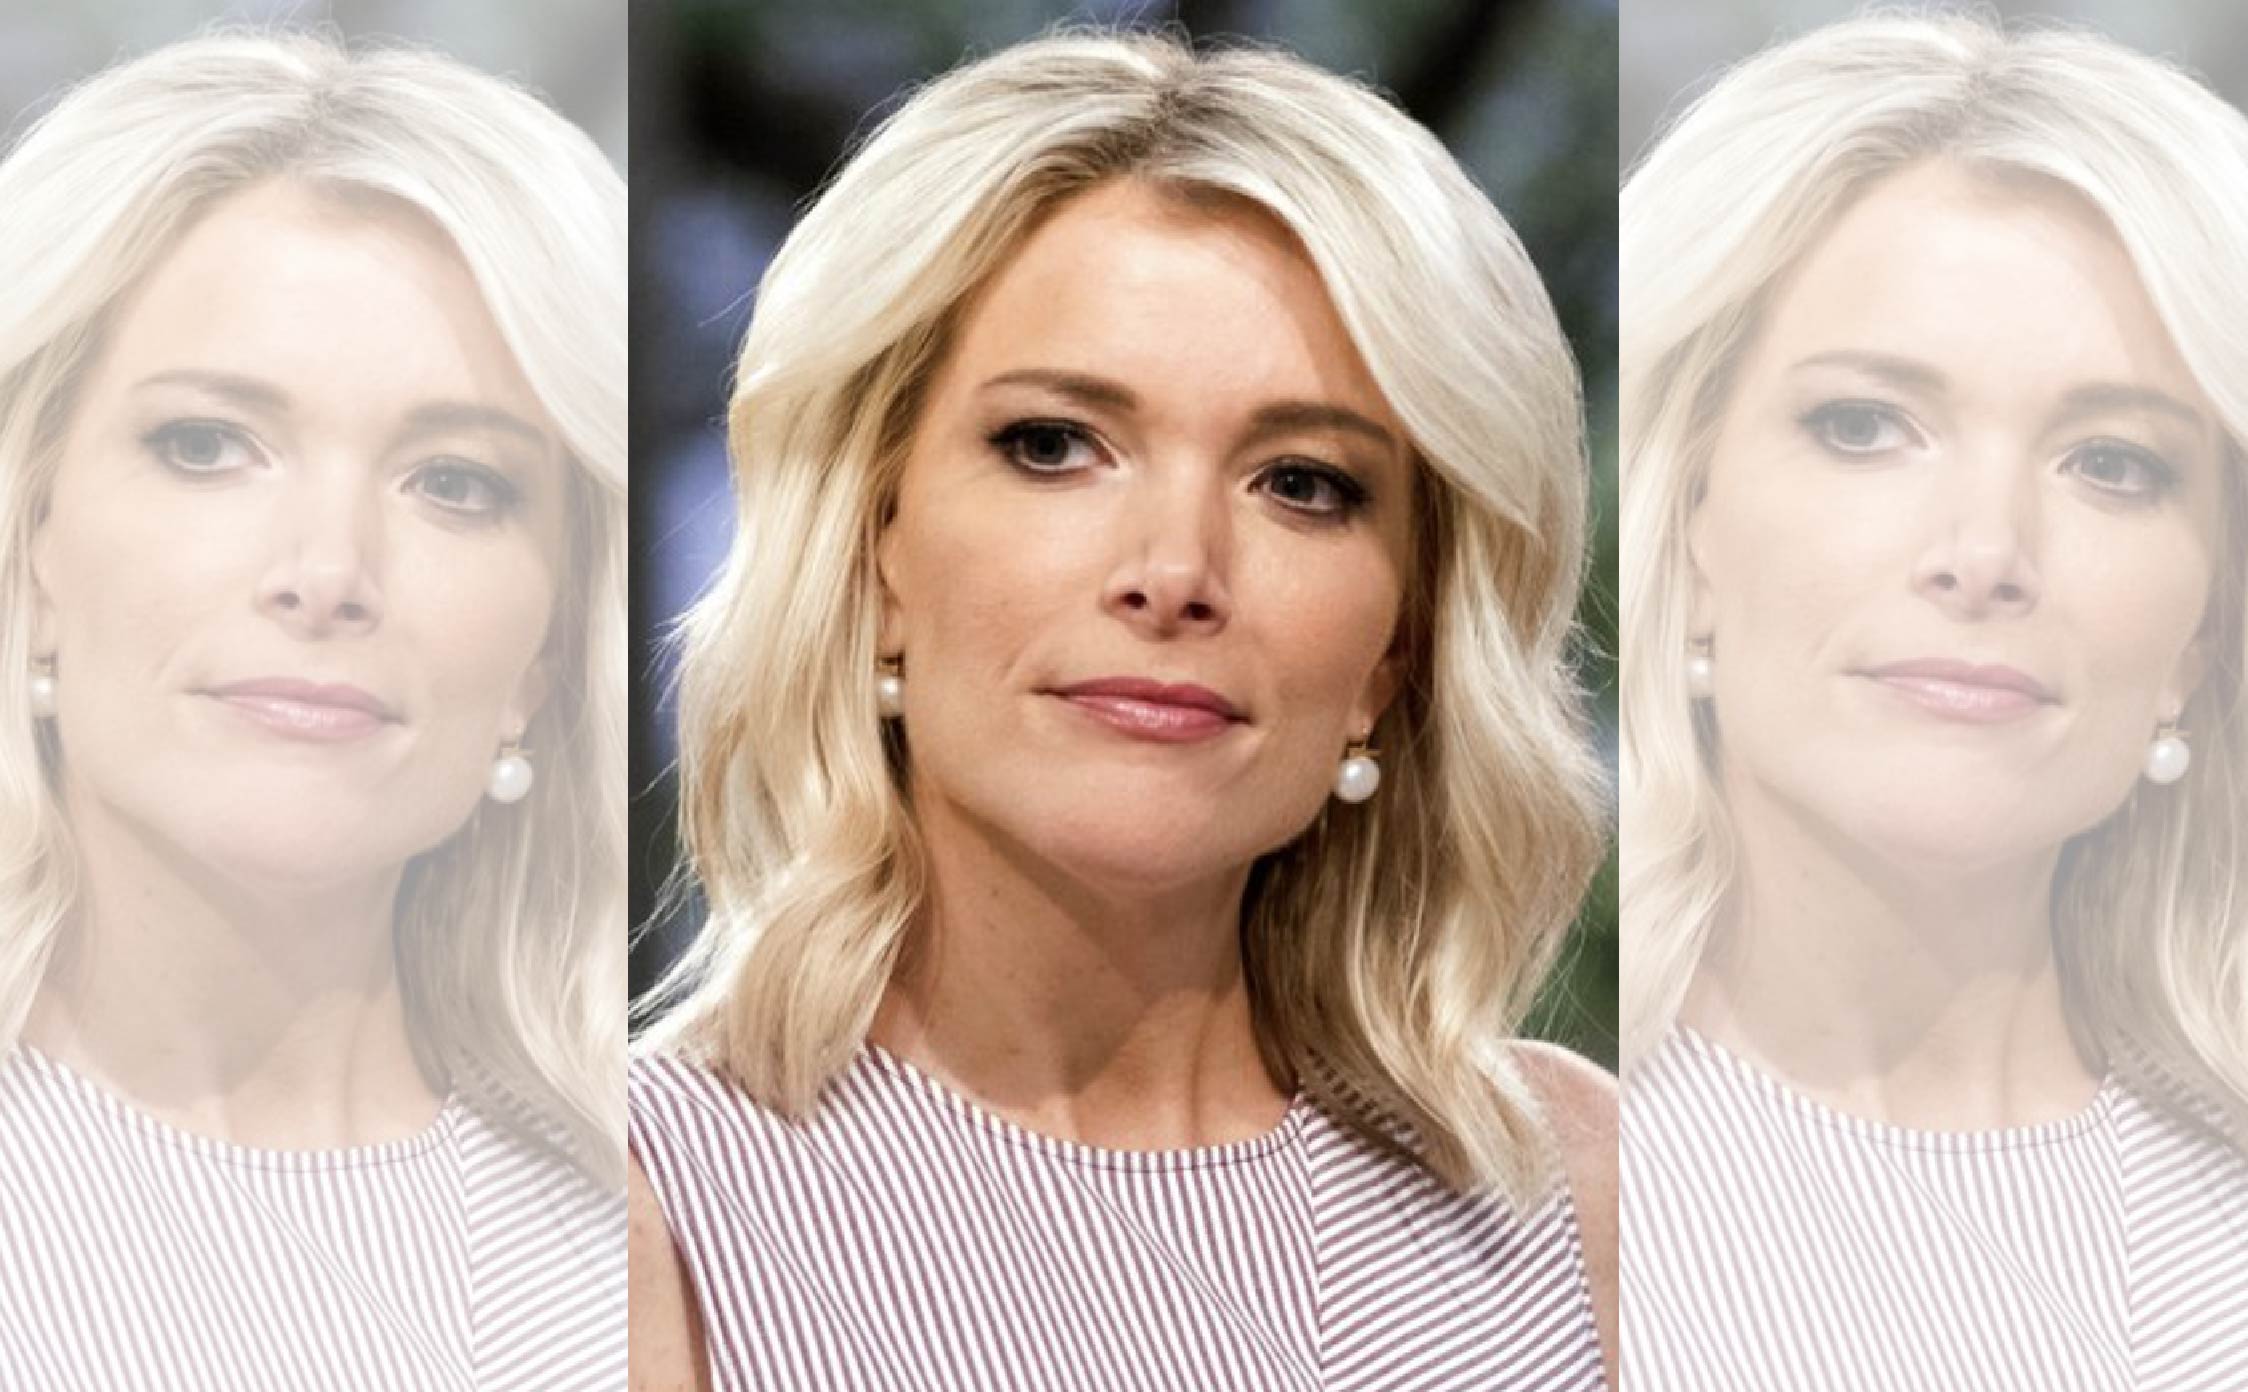 Megyn Kelly's Latest Fight Proves She's Working Harder for Trump Supporters Than GOP - WayneDupree.com